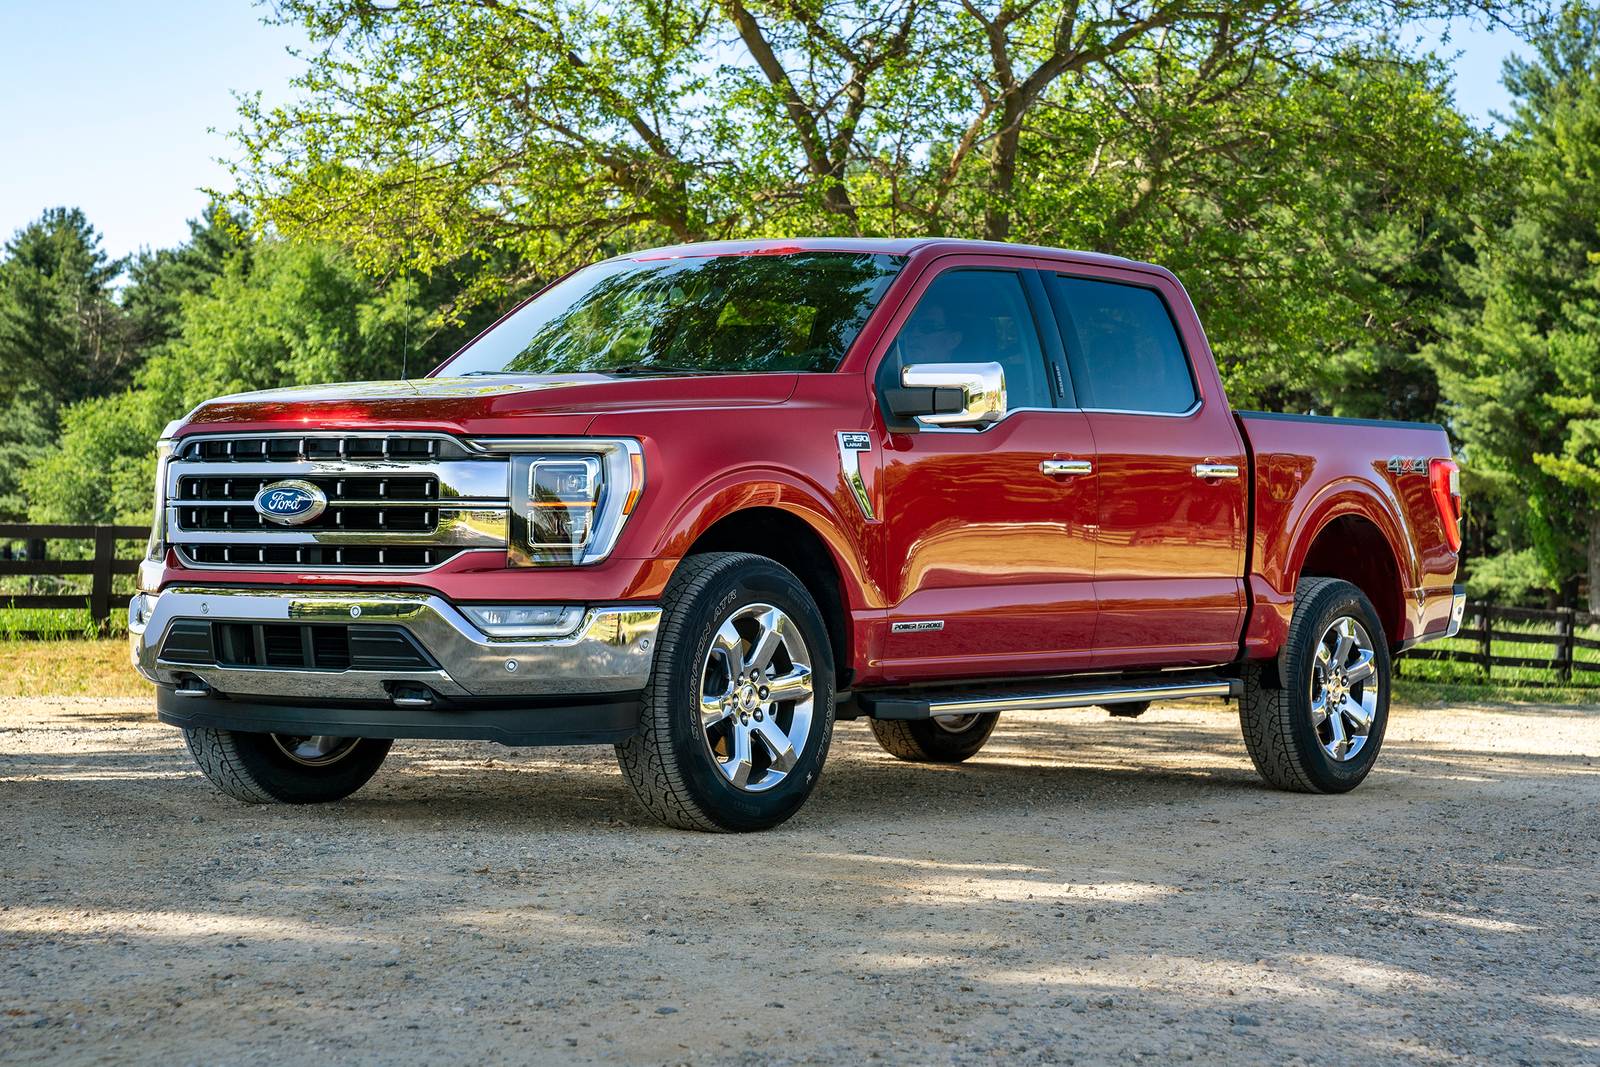 How Much Does a Ford F-150 Weigh?